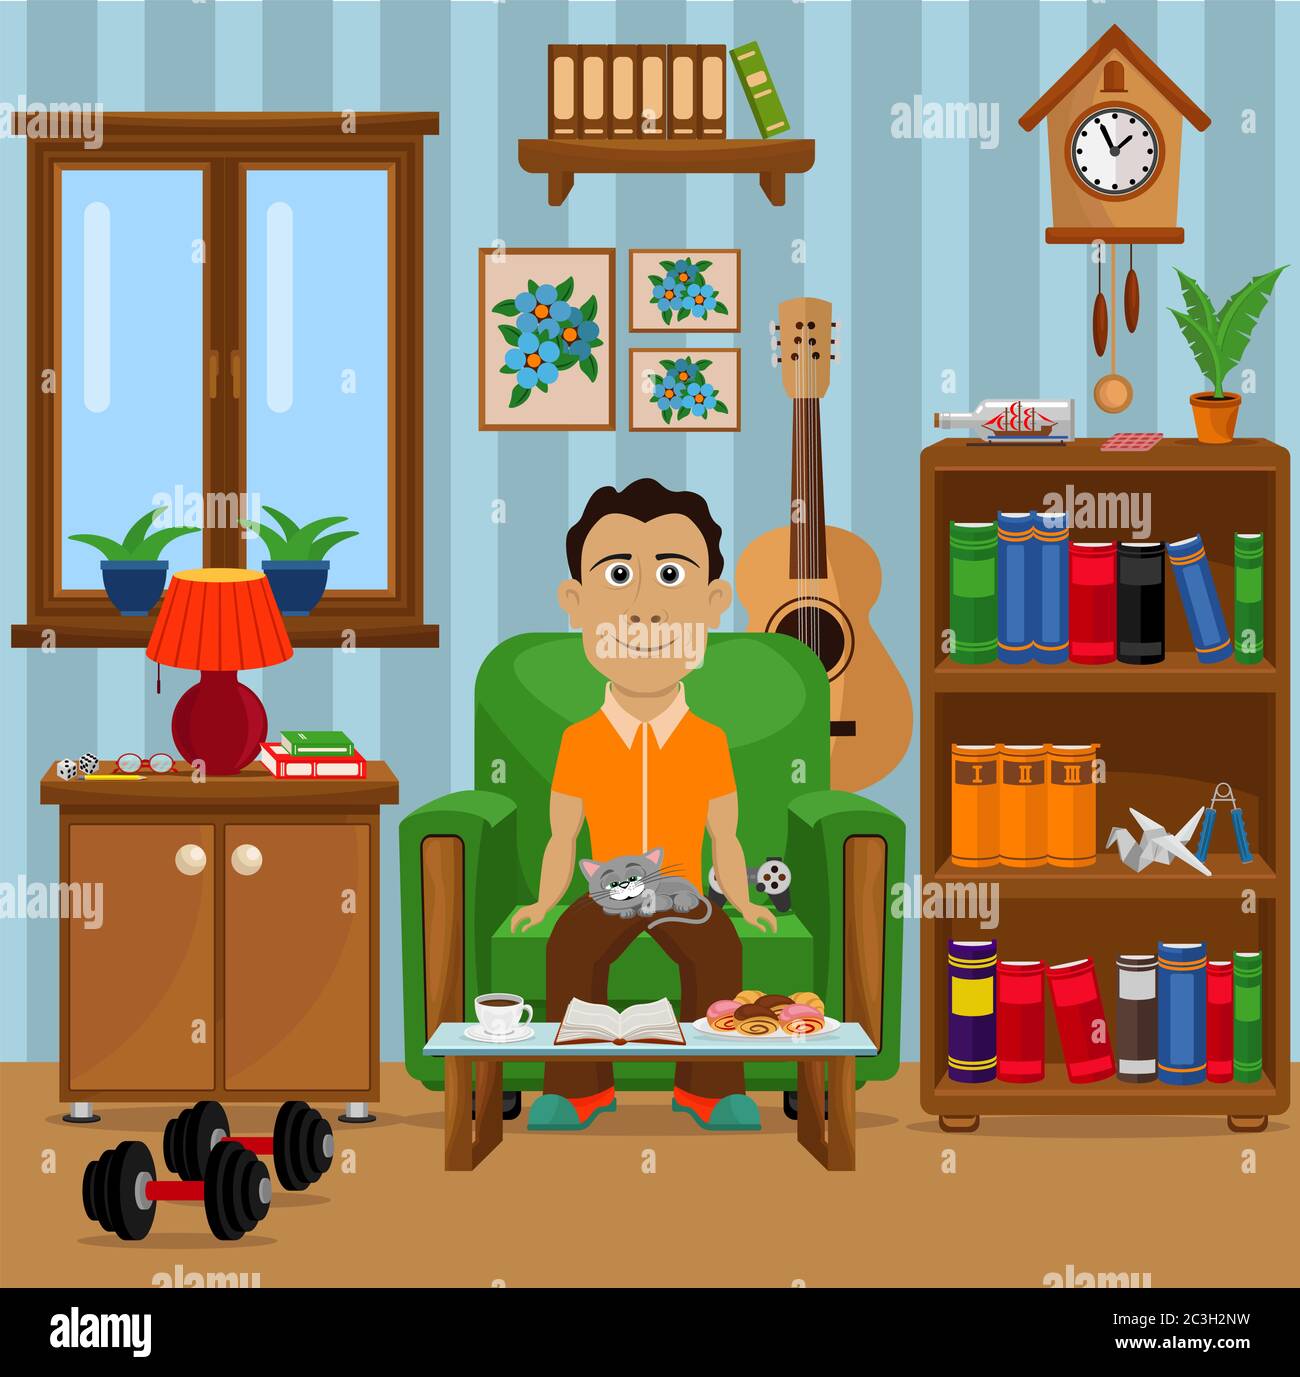 A person is sitting in a chair, reading and having a good time. Vector illustration on the theme of home interior. Stay home. Stock Vector